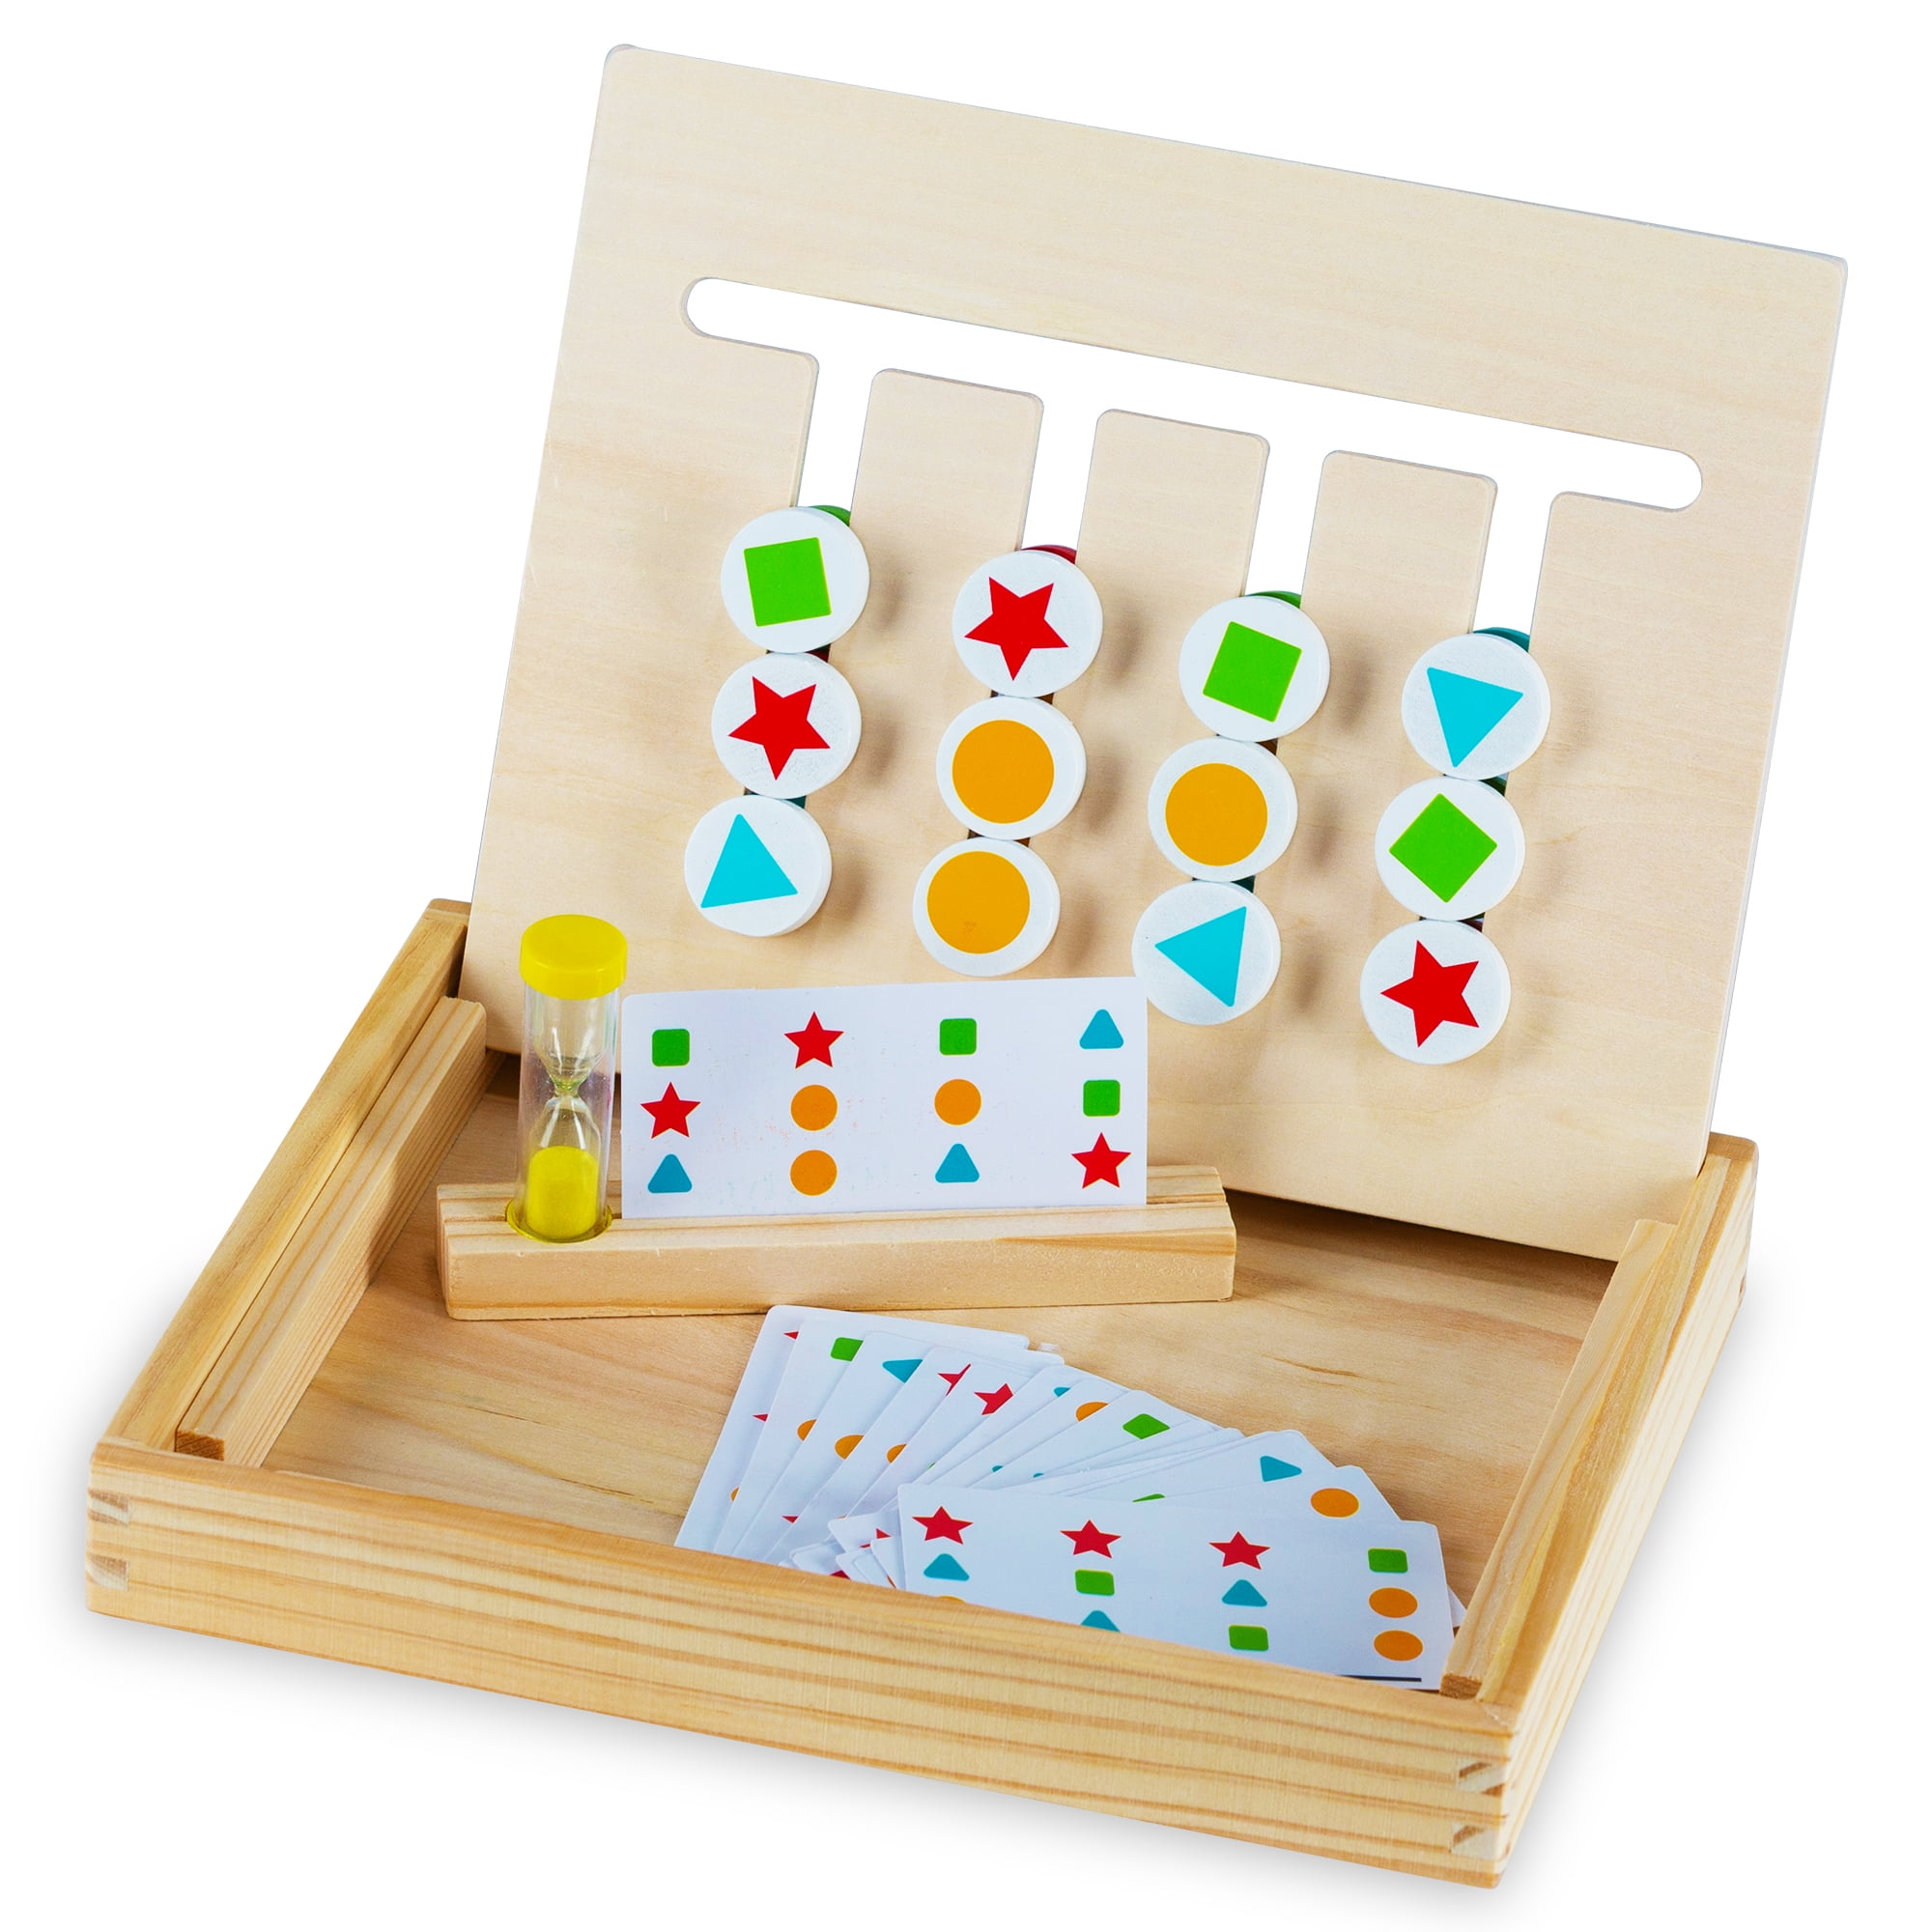 Play Brainy Four-Color & Shape Wooden Jig-Saw Puzzle Montessori STEM Toy